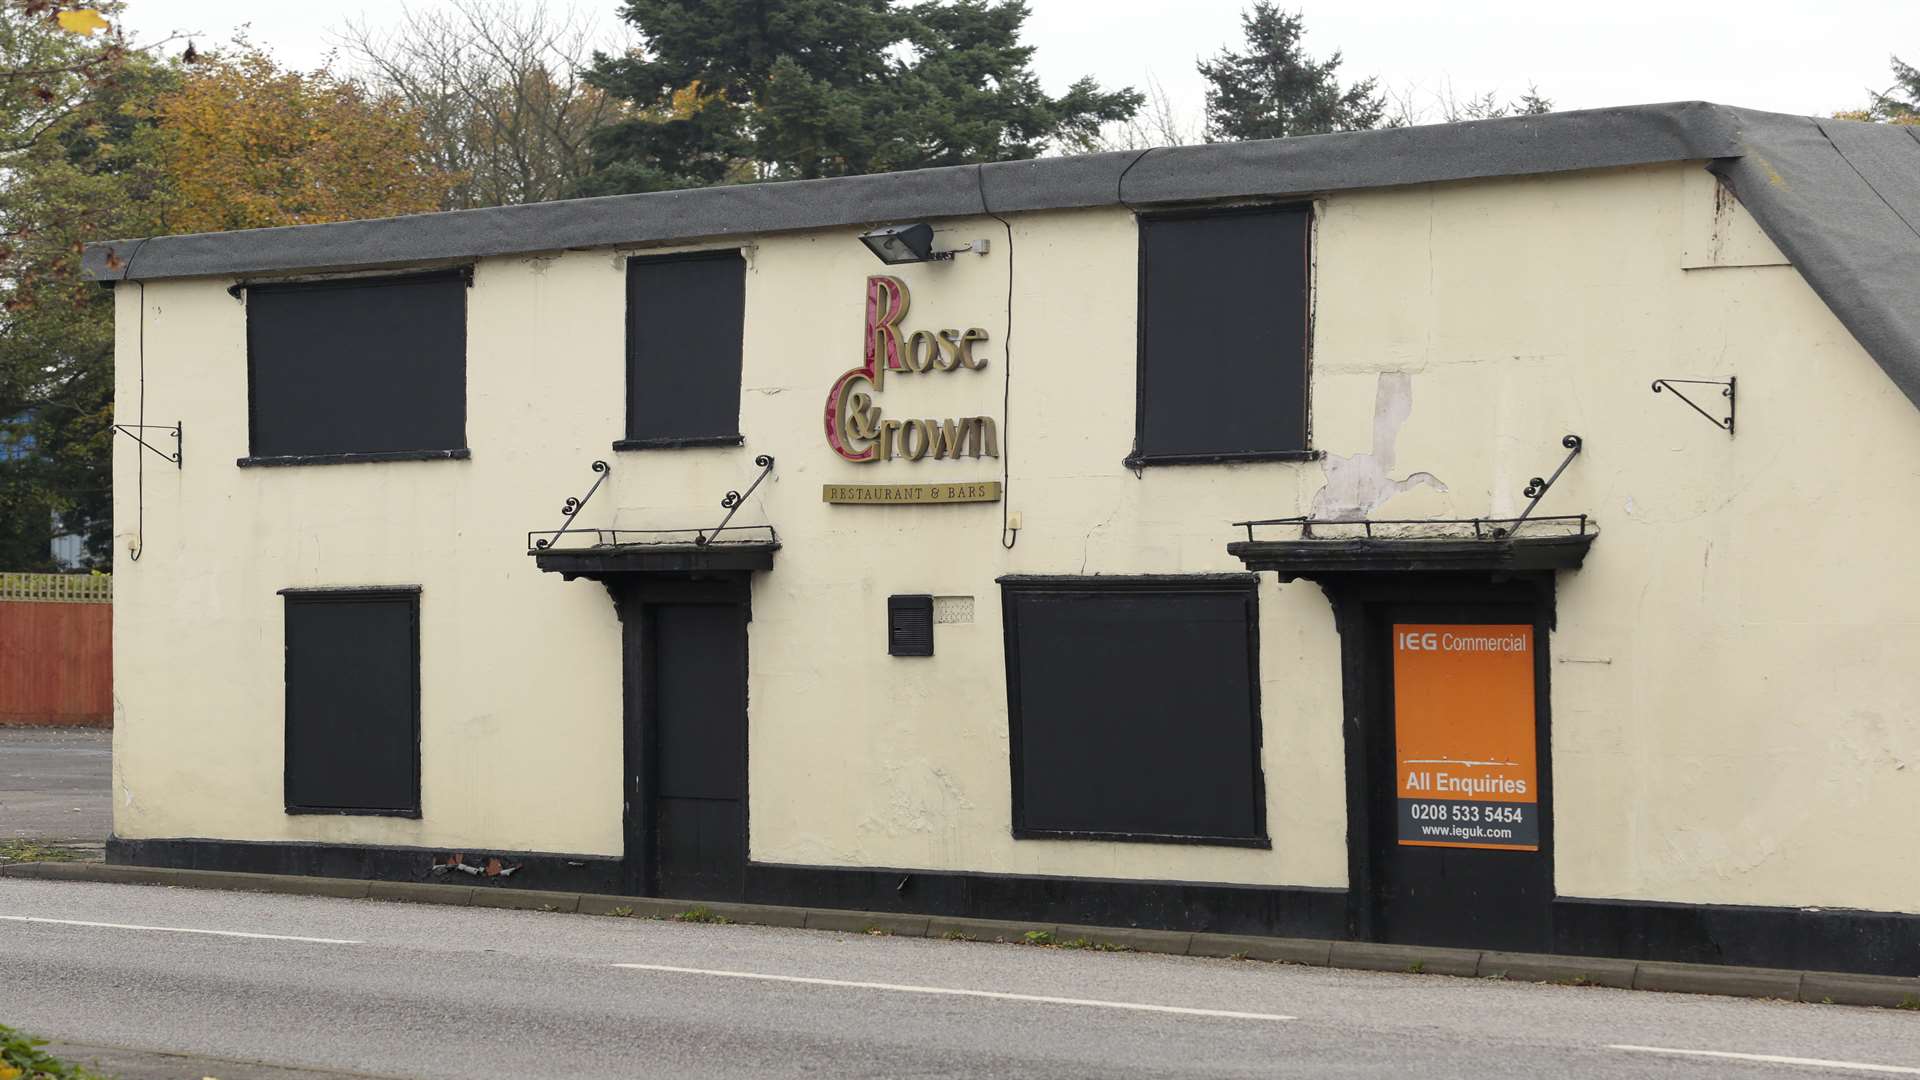 The pub was derelict for a number of years